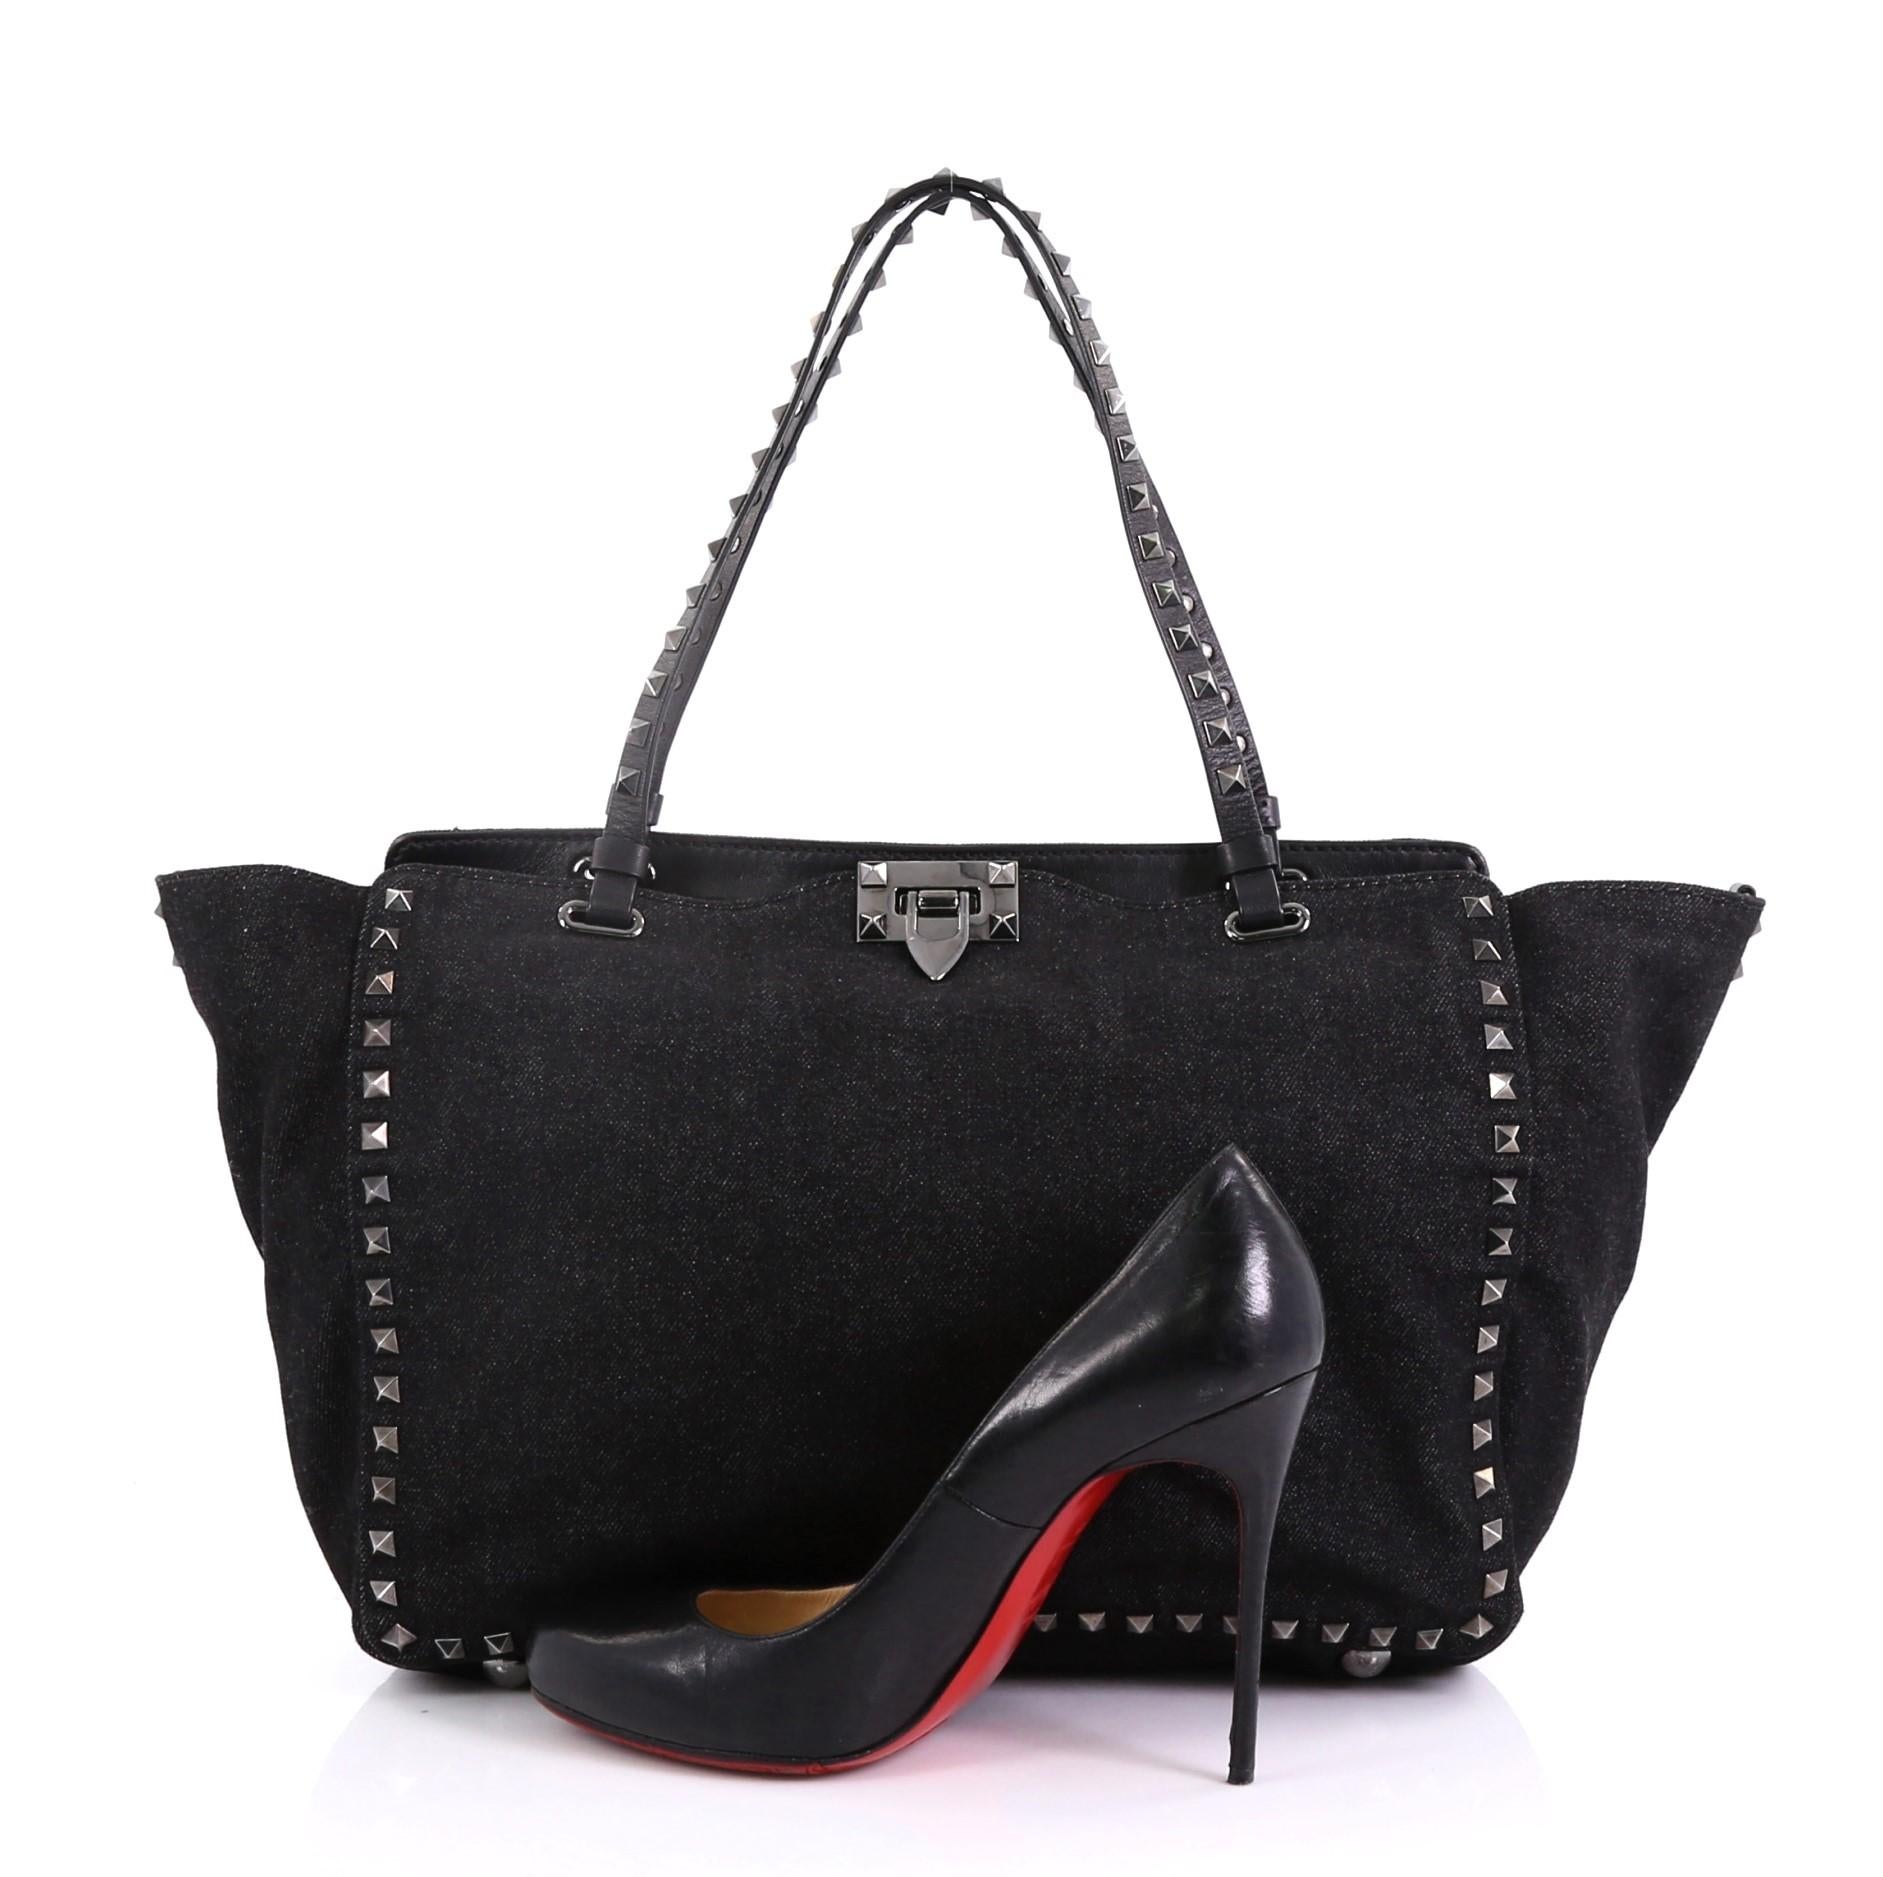 This Valentino Rockstud Tote Denim Medium, crafted in black denim, features dual studded handles, pyramid stud borders, and gunmetal-tone hardware. Its flip-clasp and top zip closures open to a black fabric interior with zip and slip pockets.